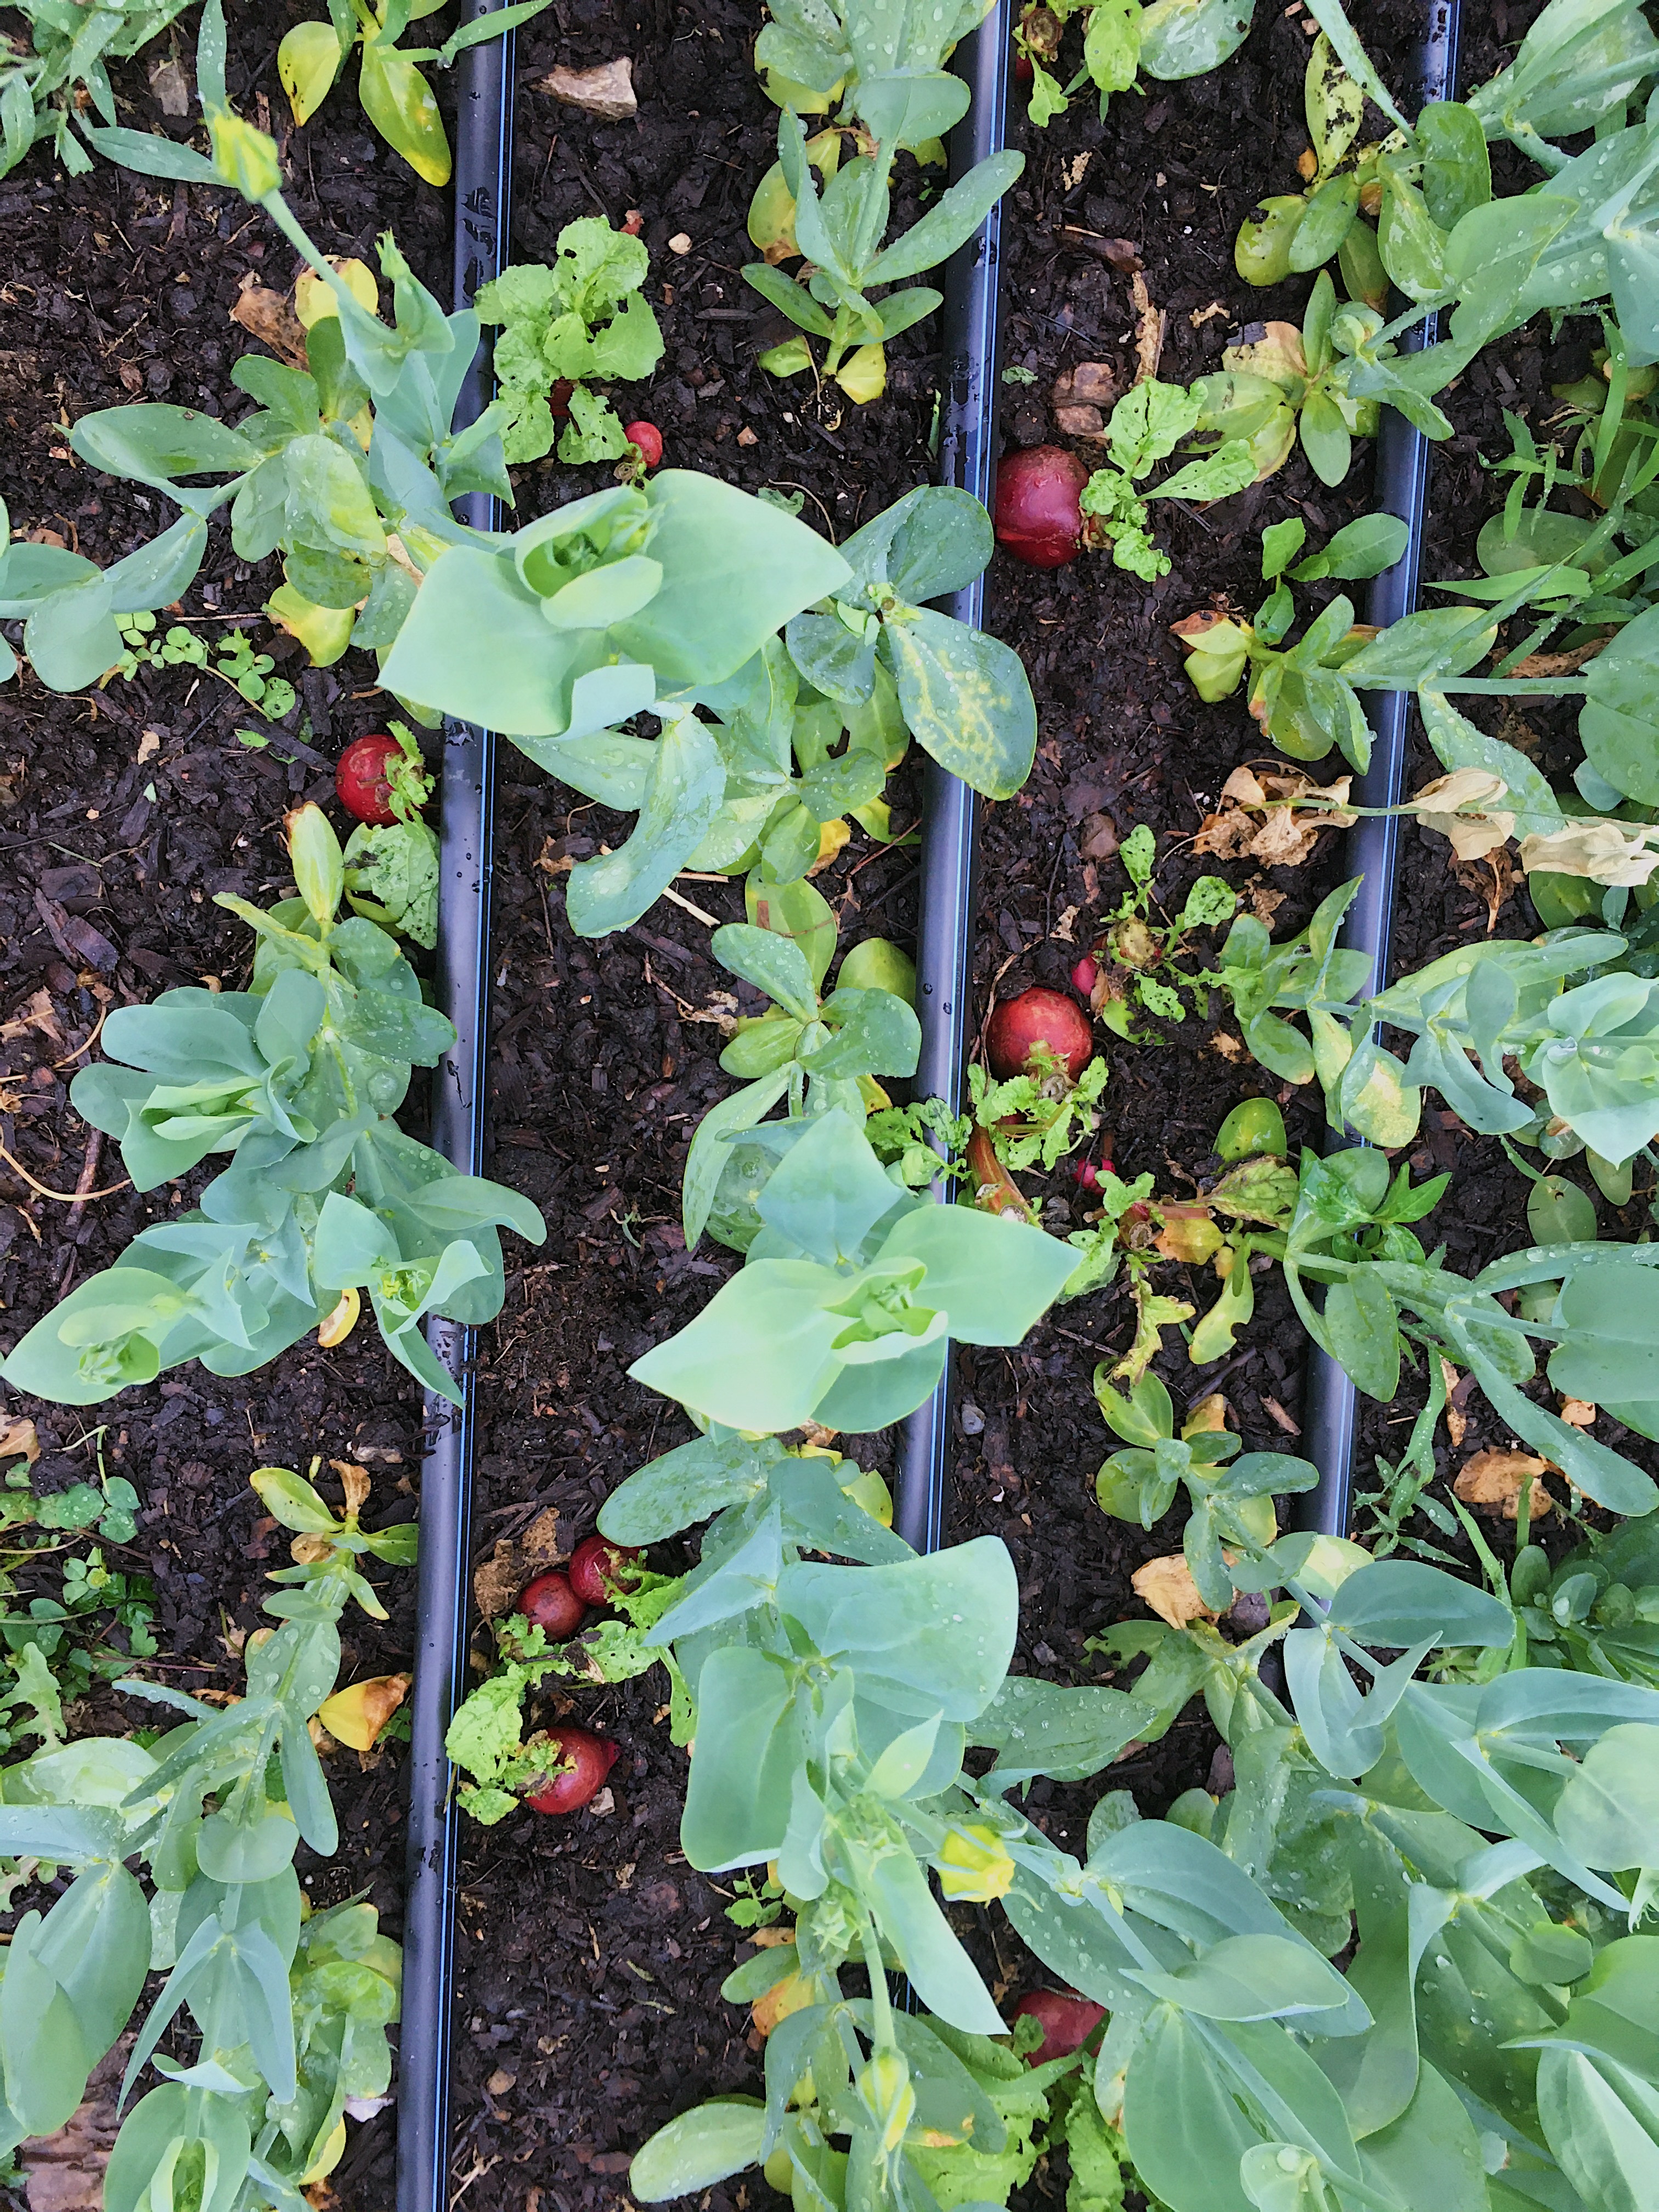 Intercropping for flower farming. Pictured radishes intercropped with lisianthus at Love 'n Fresh Flowers, a flower farm located in Philadelphia using no-till farming practices. 